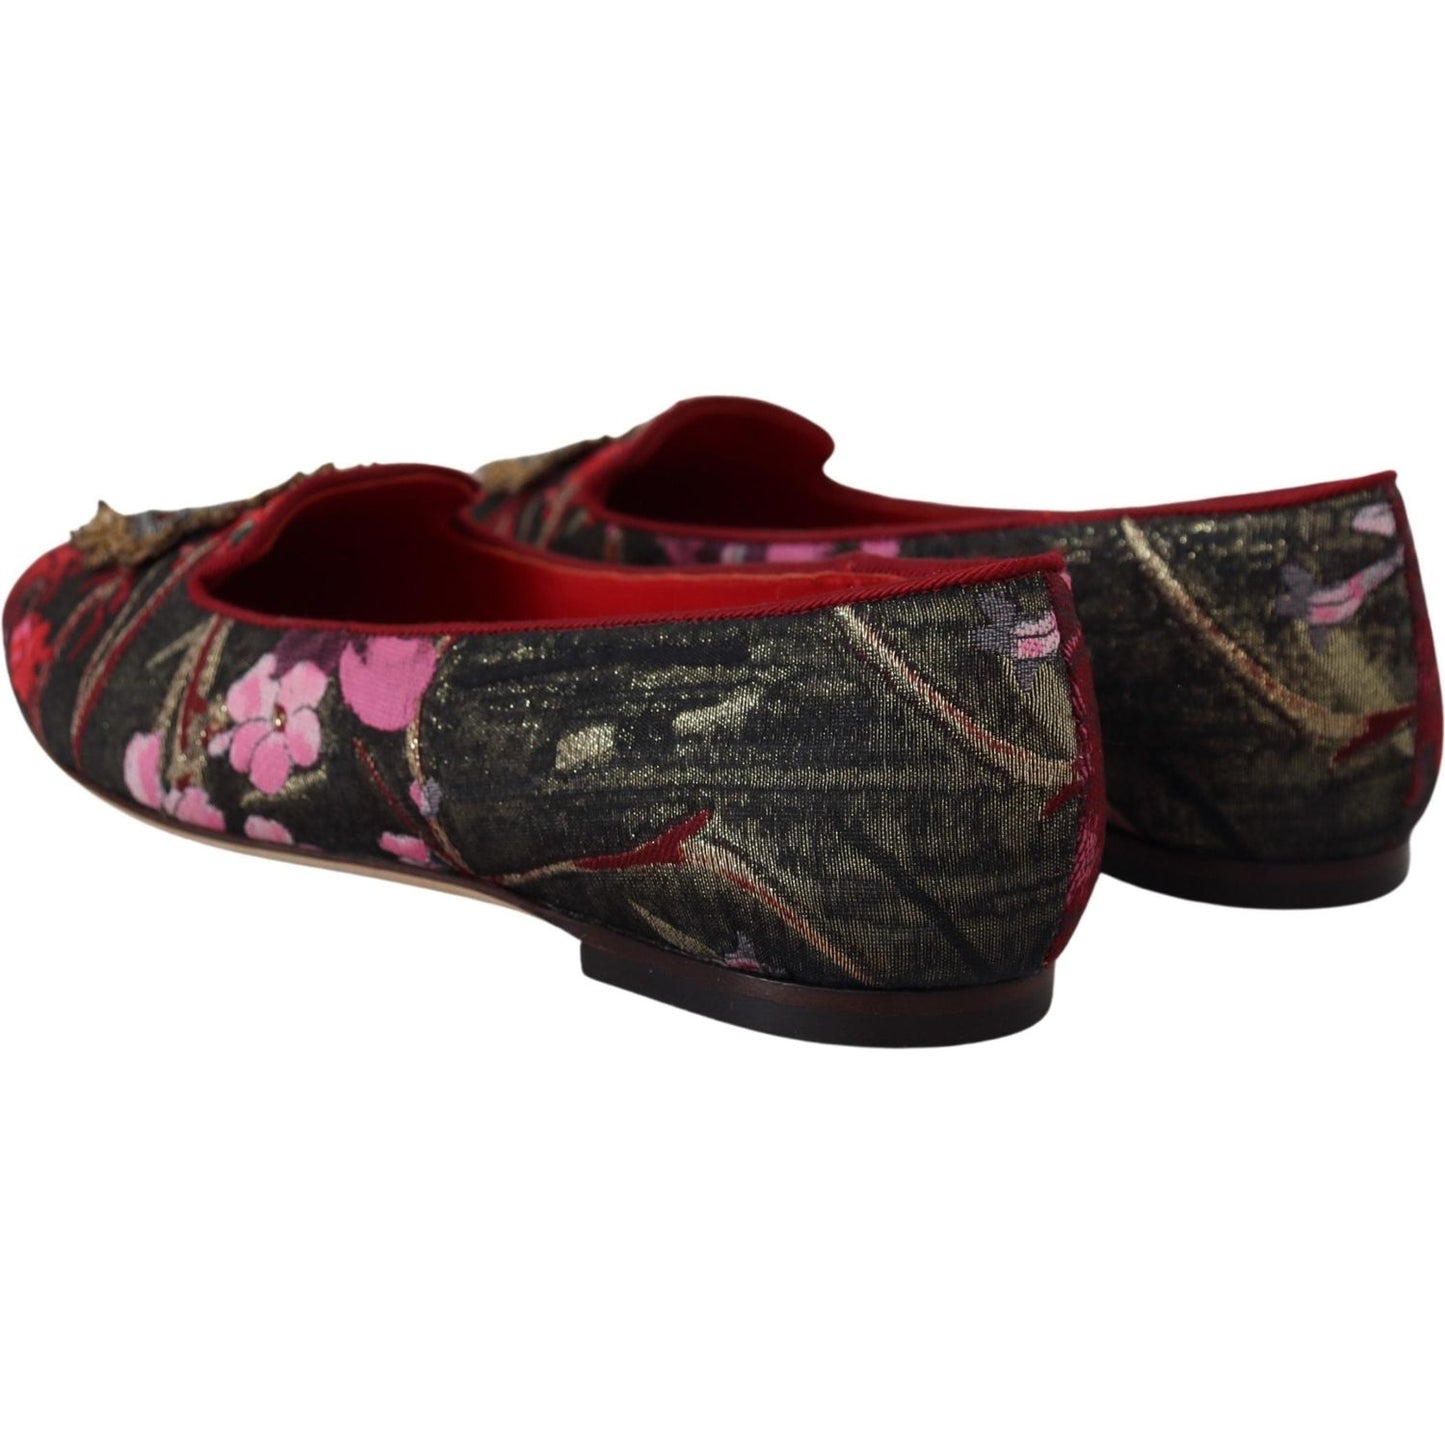 Dolce & Gabbana Multicolor Leather and Fabric Flats with Sacred Heart Patch multicolor-jacquard-sacred-heart-patch-slip-on-shoes